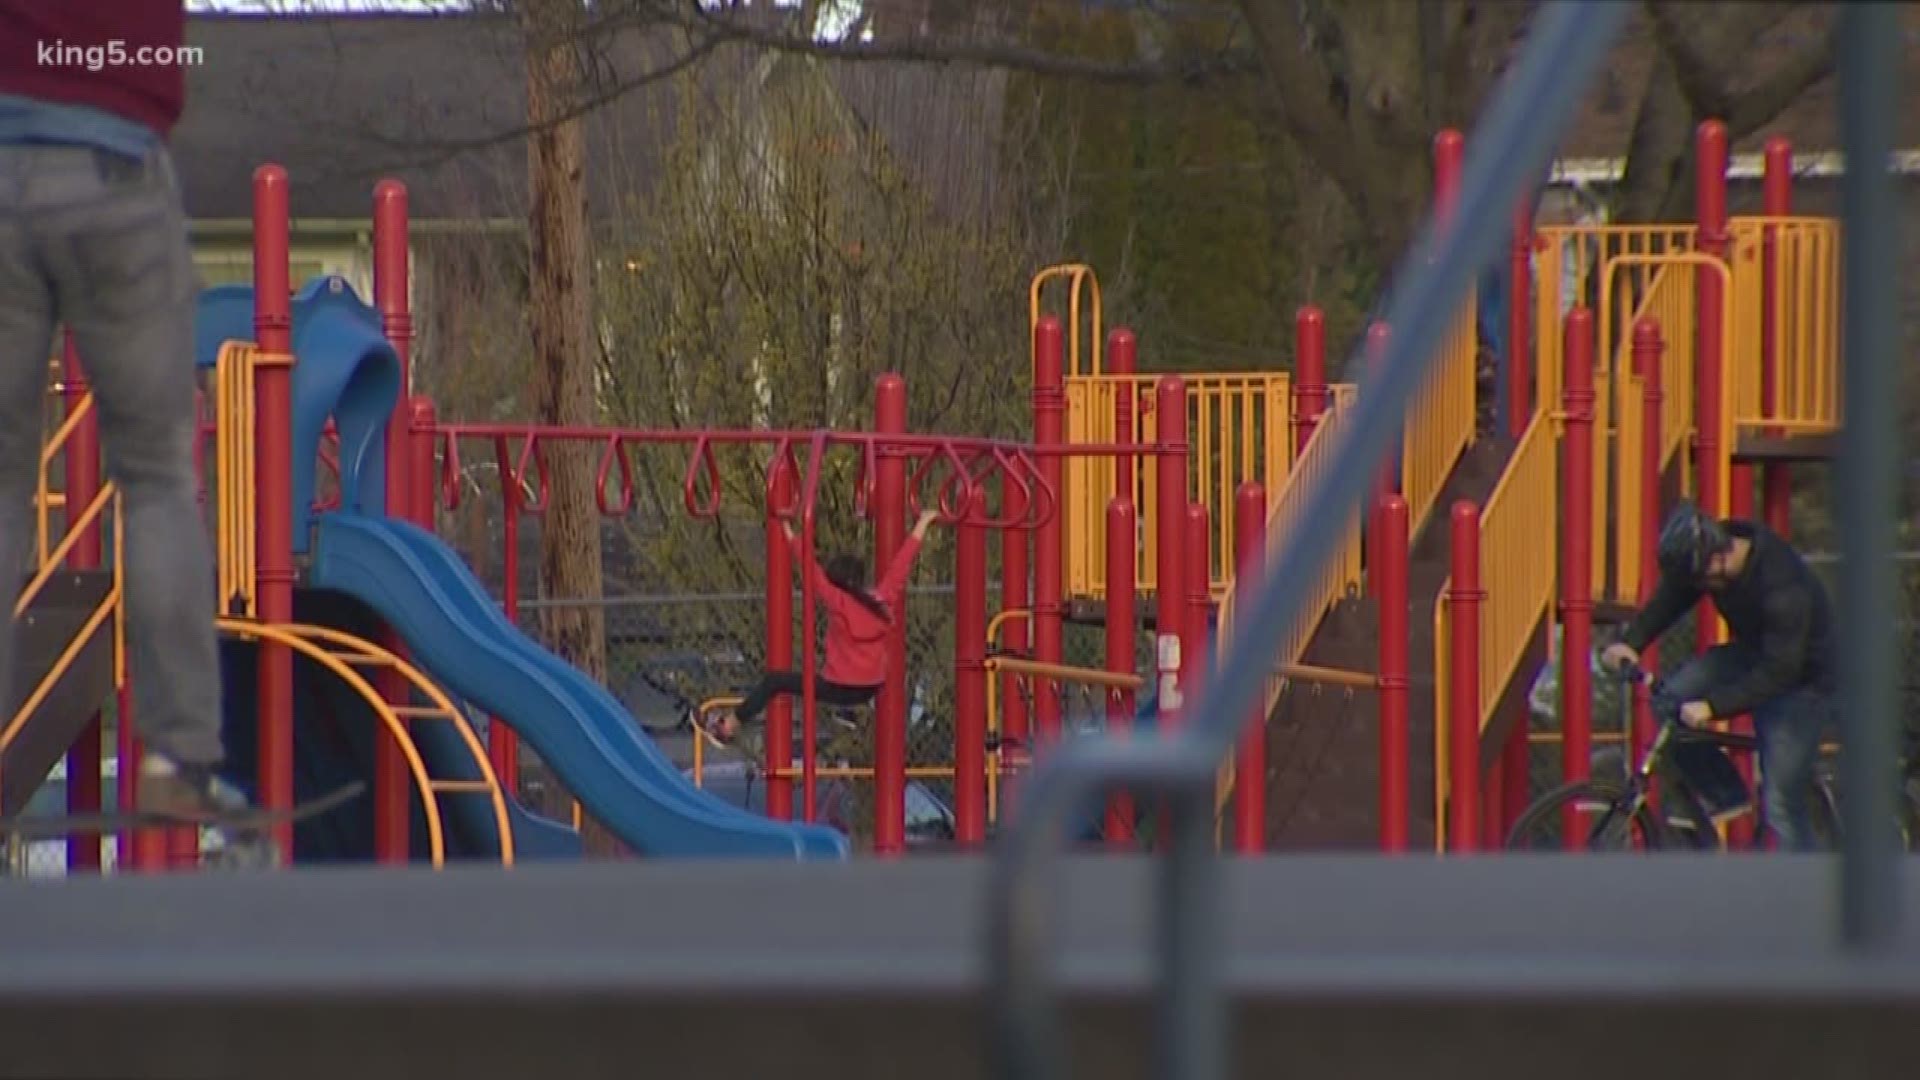 Seattle Public Schools will be closed for two weeks, leaving parents scrambling to find childcare alternatives.